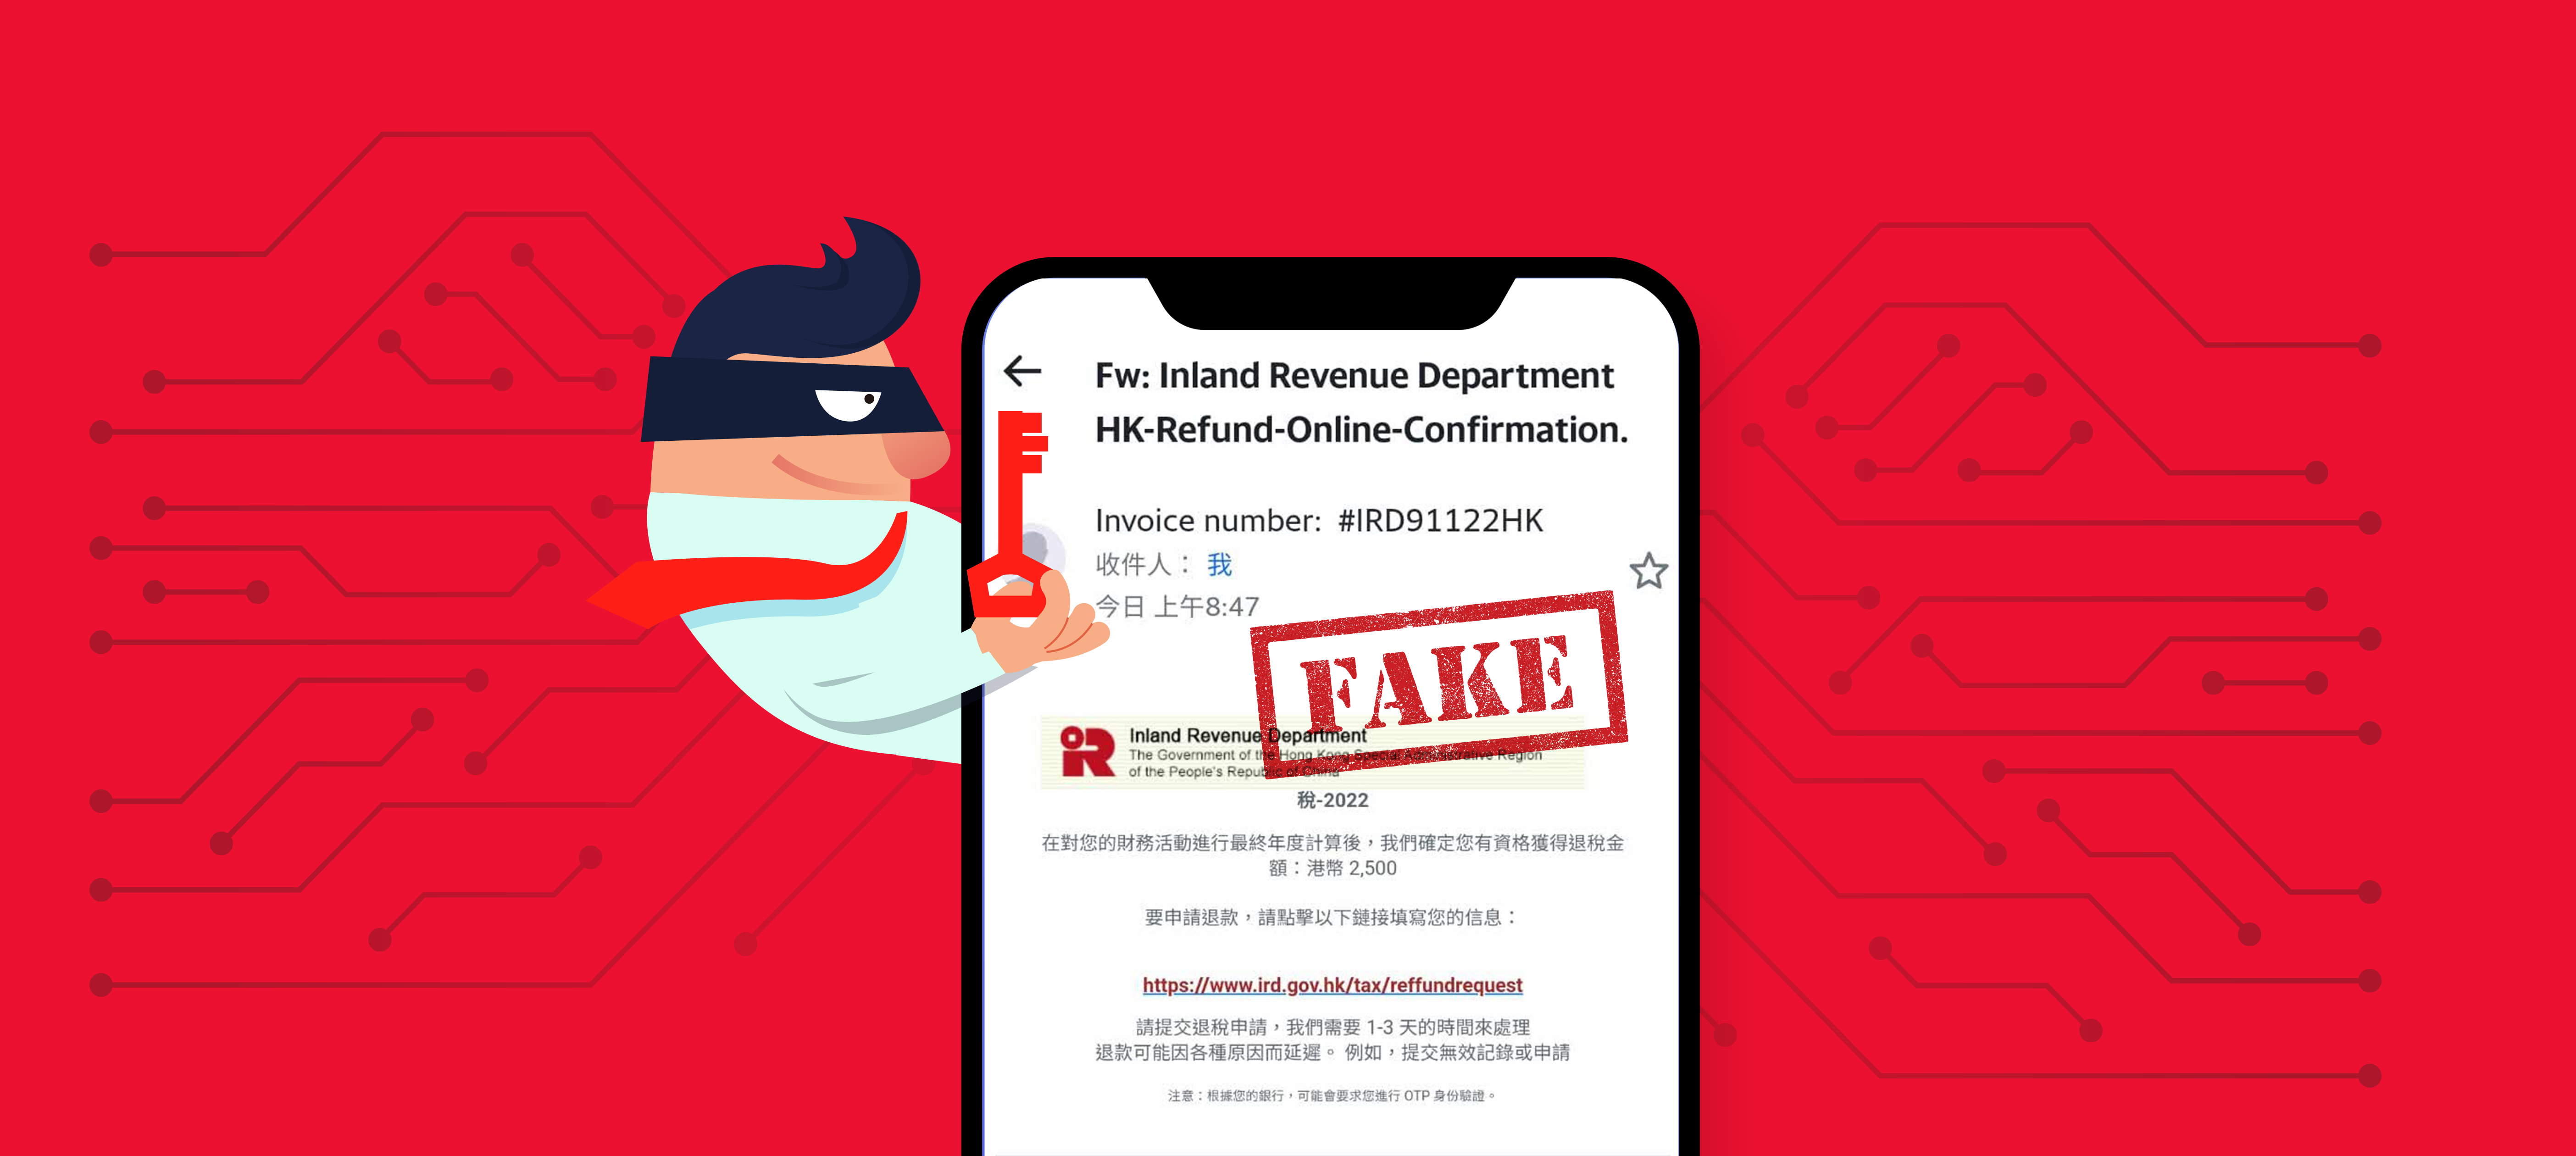 Beware of scammers impersonating an Inland Revenue Department officer